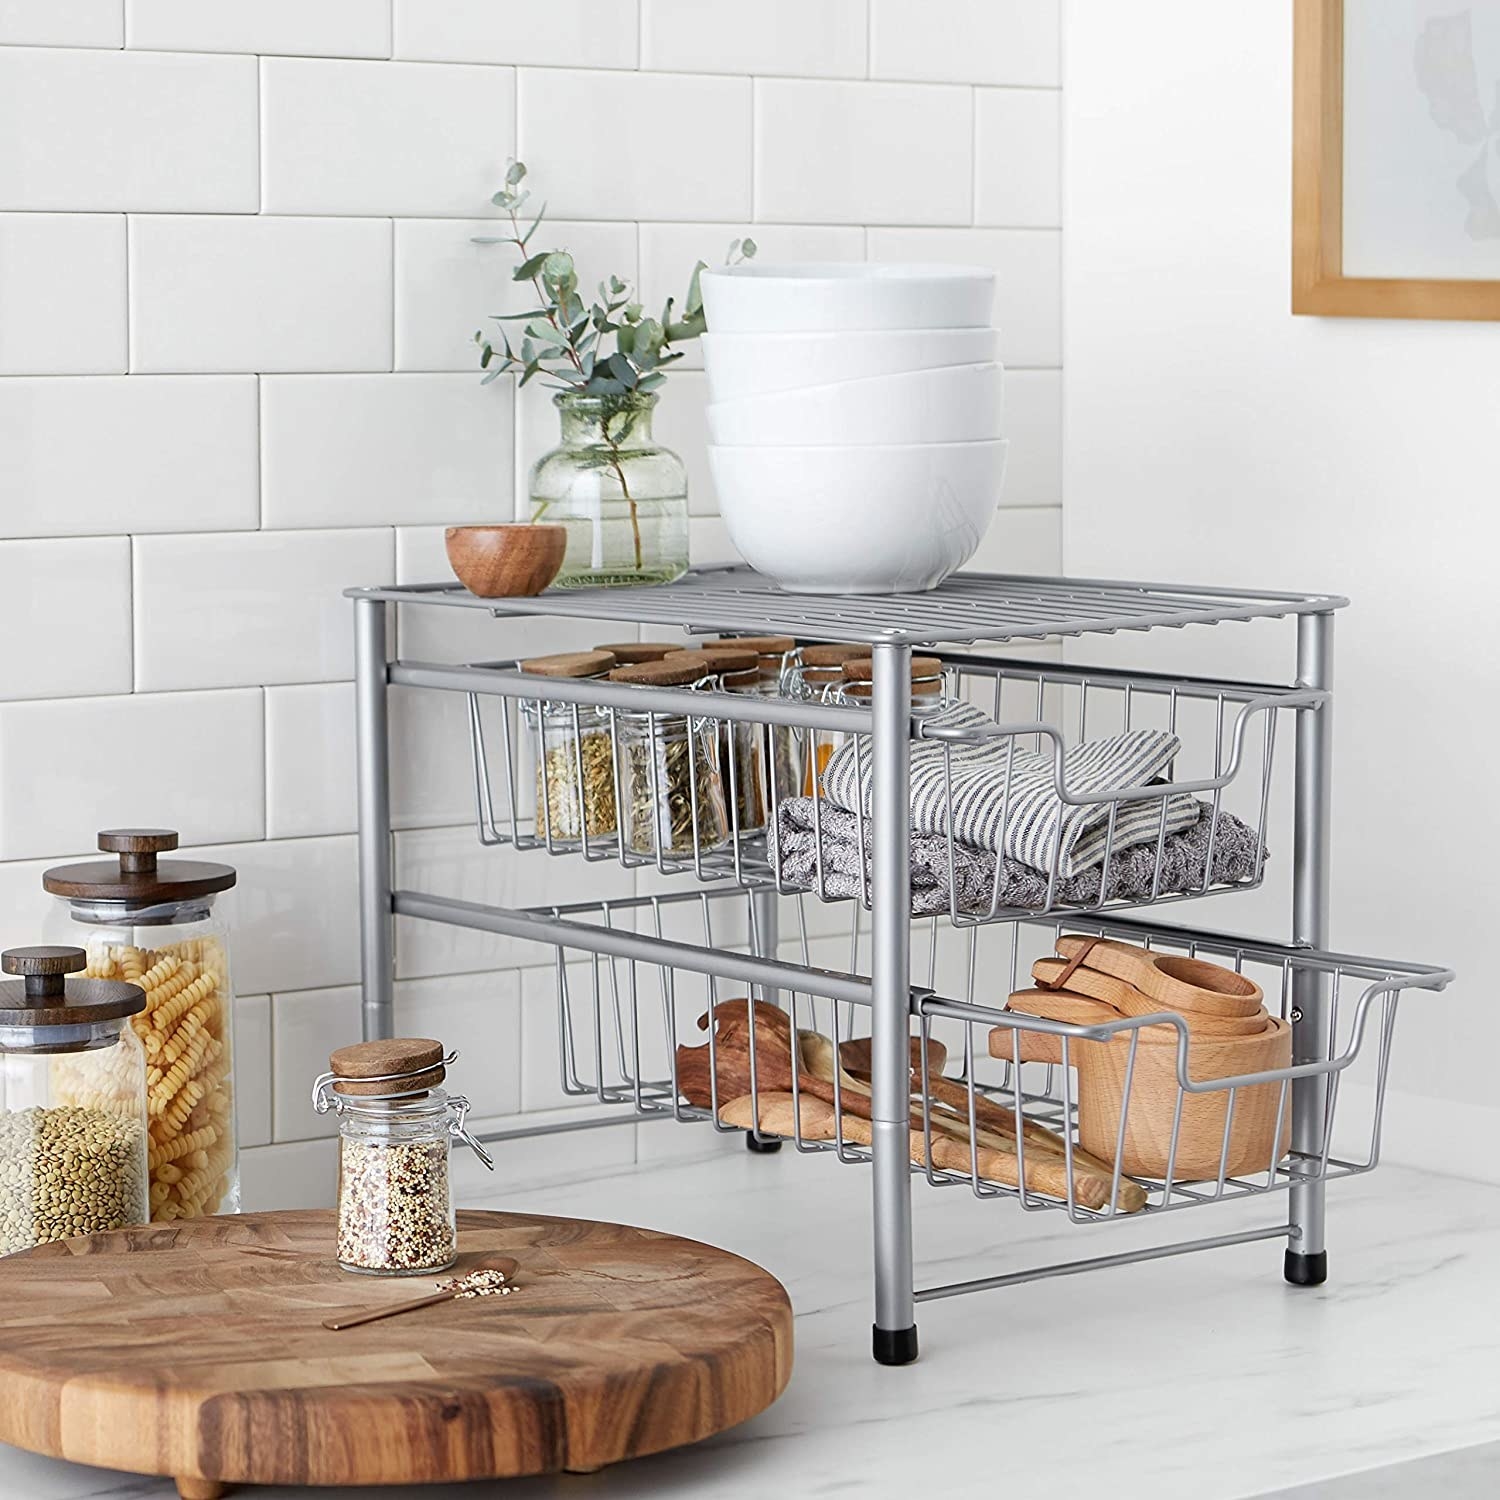 A silver storage unit with two sliding baskets